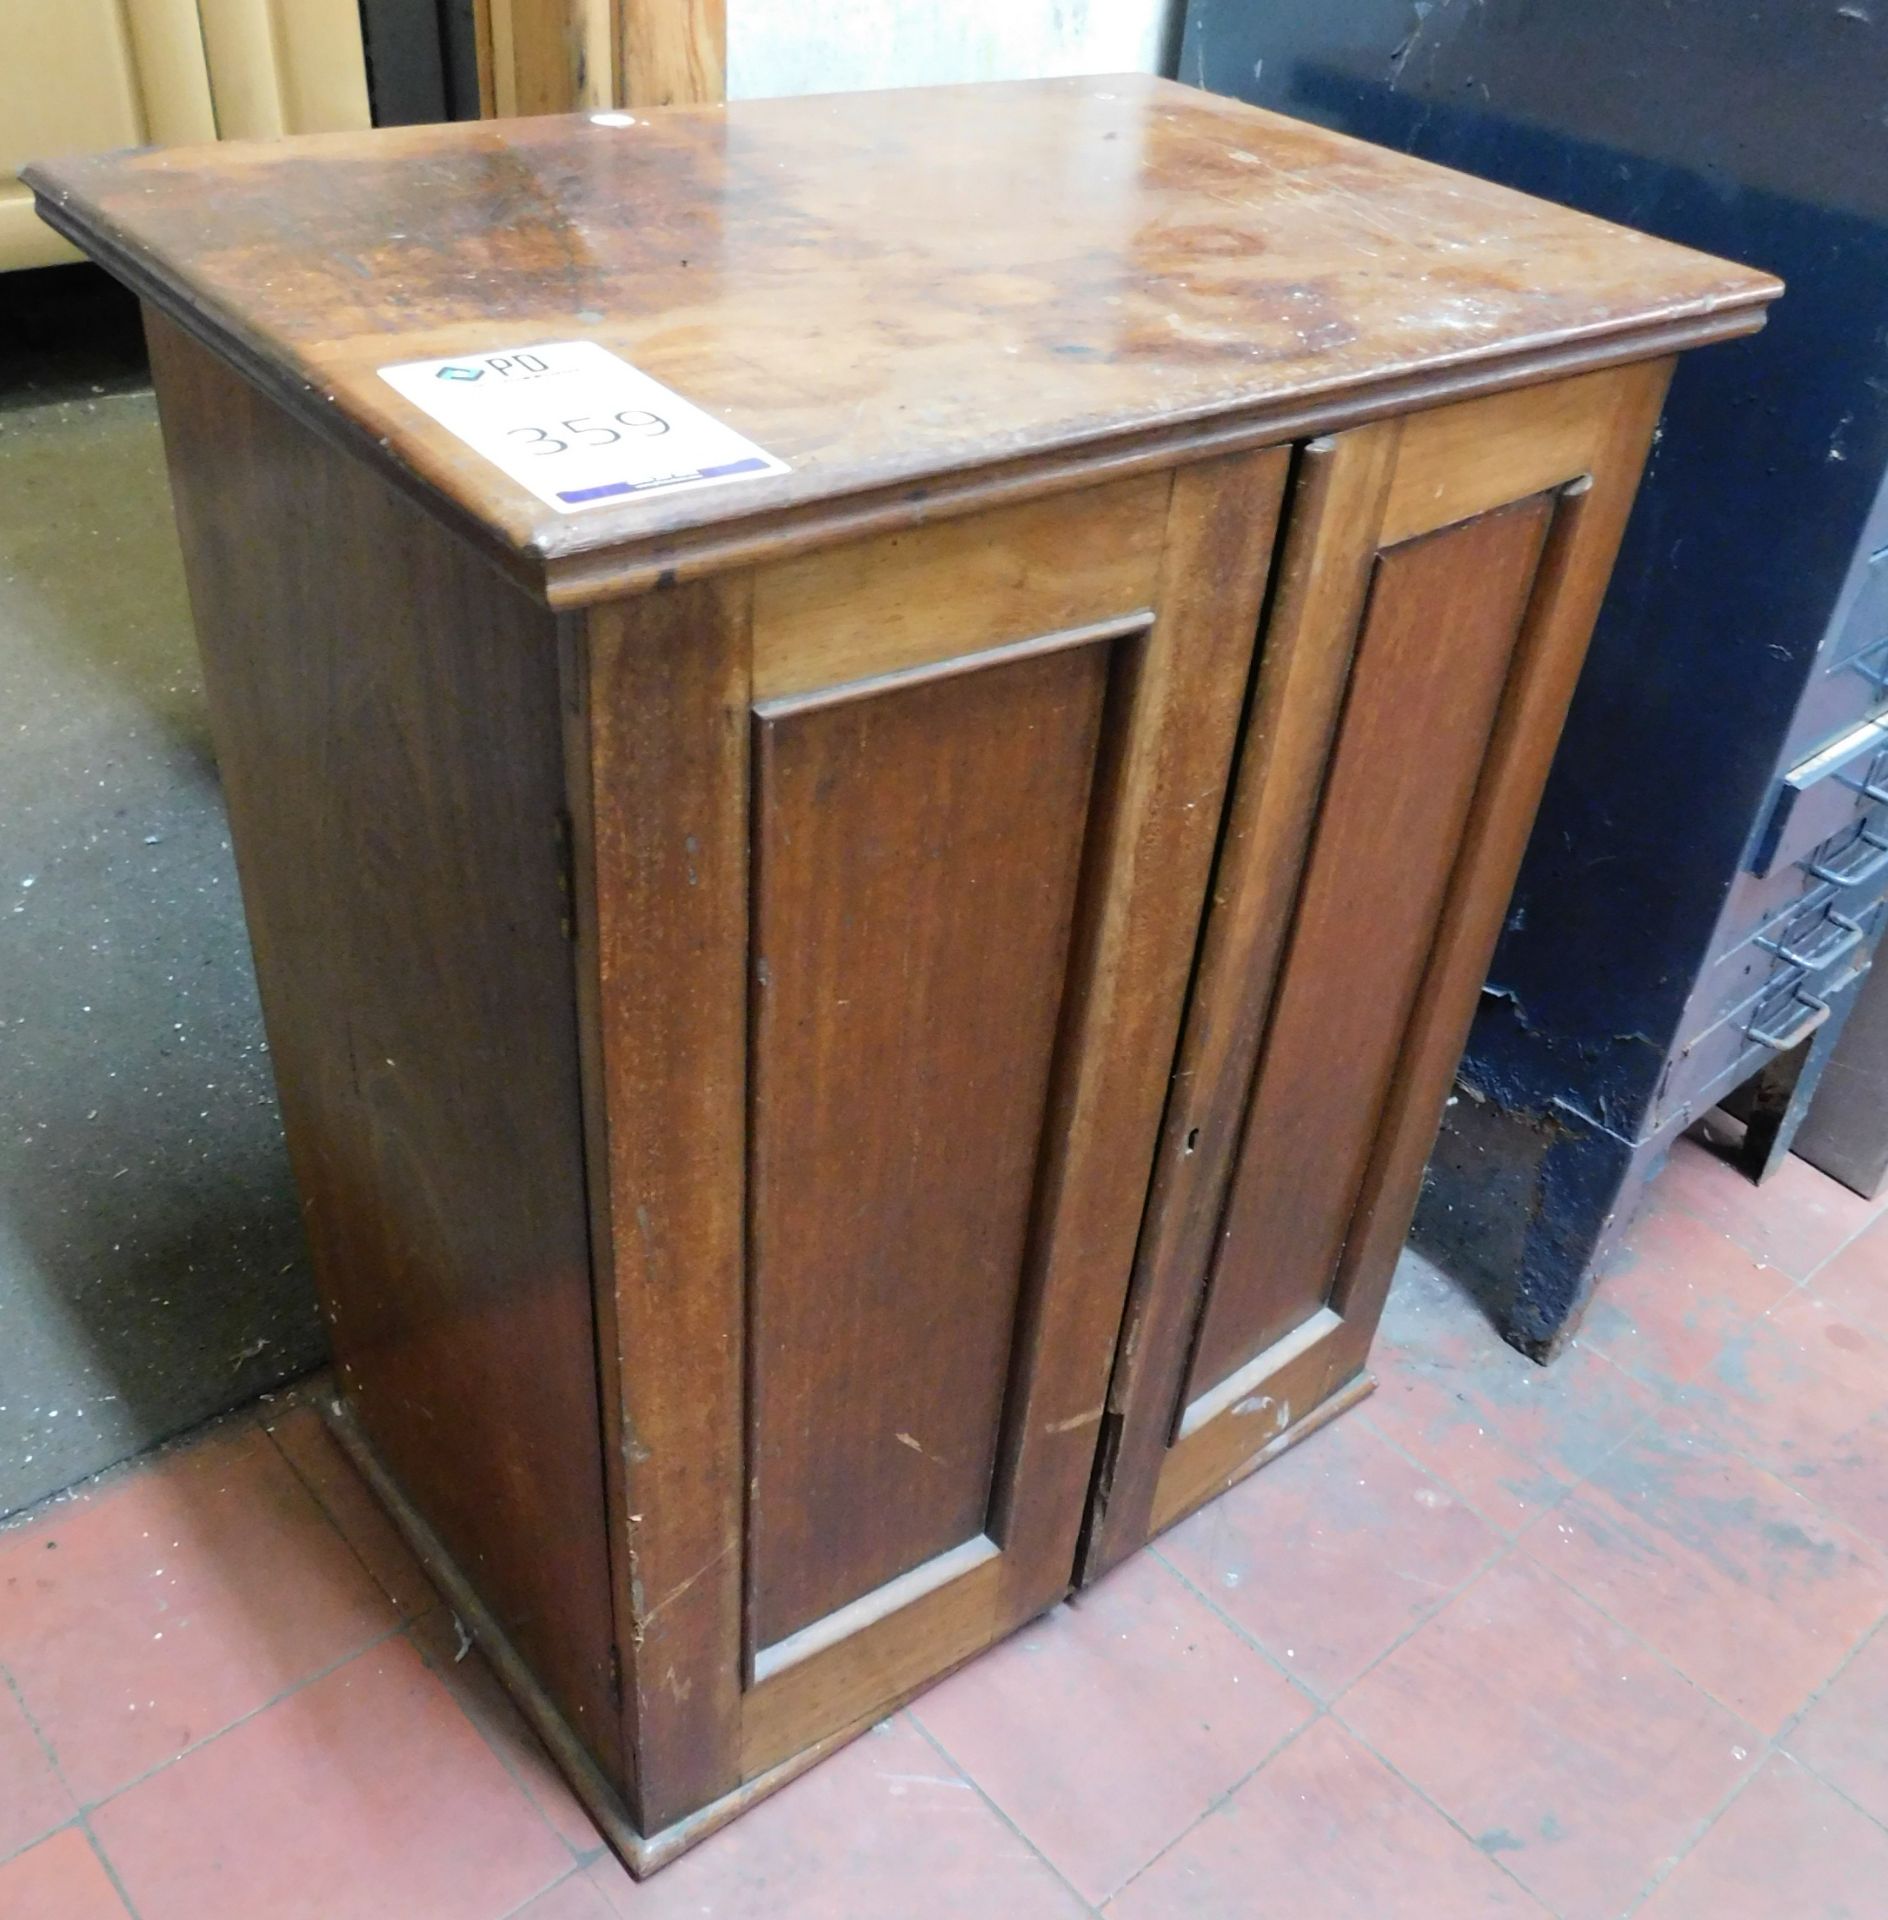 Wooden Multi-Drawer Cabinet with Two Doors & Contents (Location: Bolton. Please Refer to General